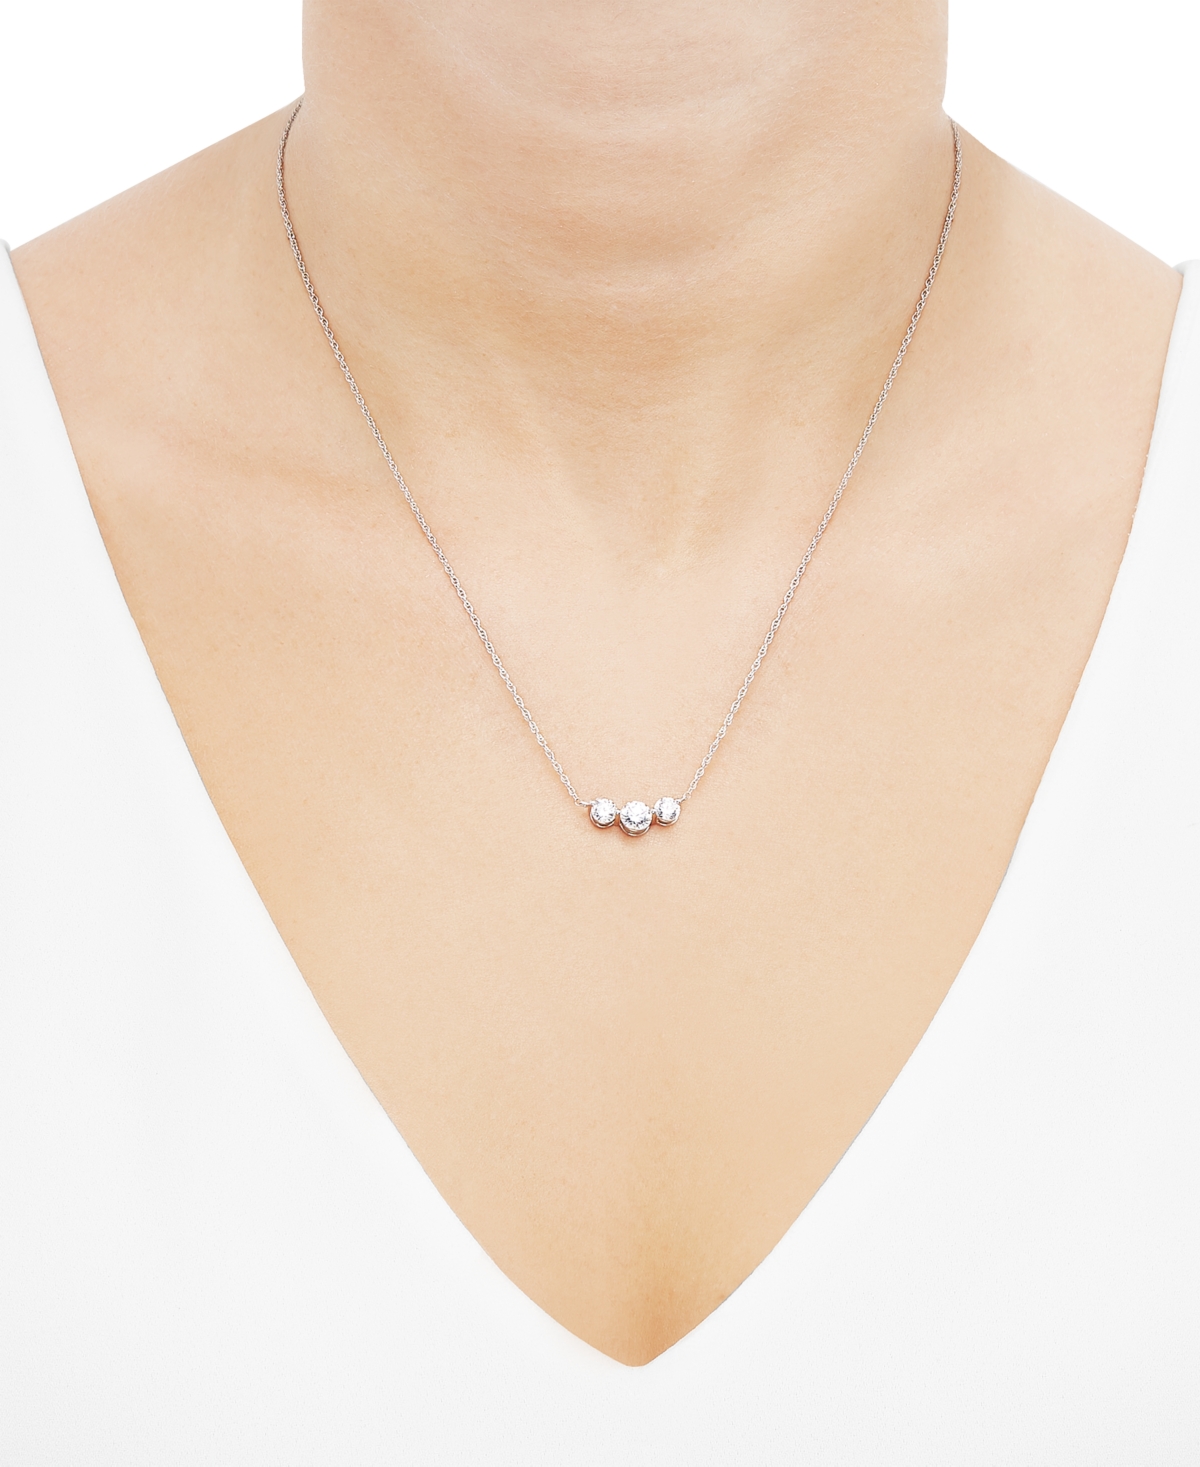 Shop Grown With Love Lab Grown Diamond Three Stone Pendant Collar Necklace (1 Ct. T.w.) In 14k White Gold, 16" + 2" Exten